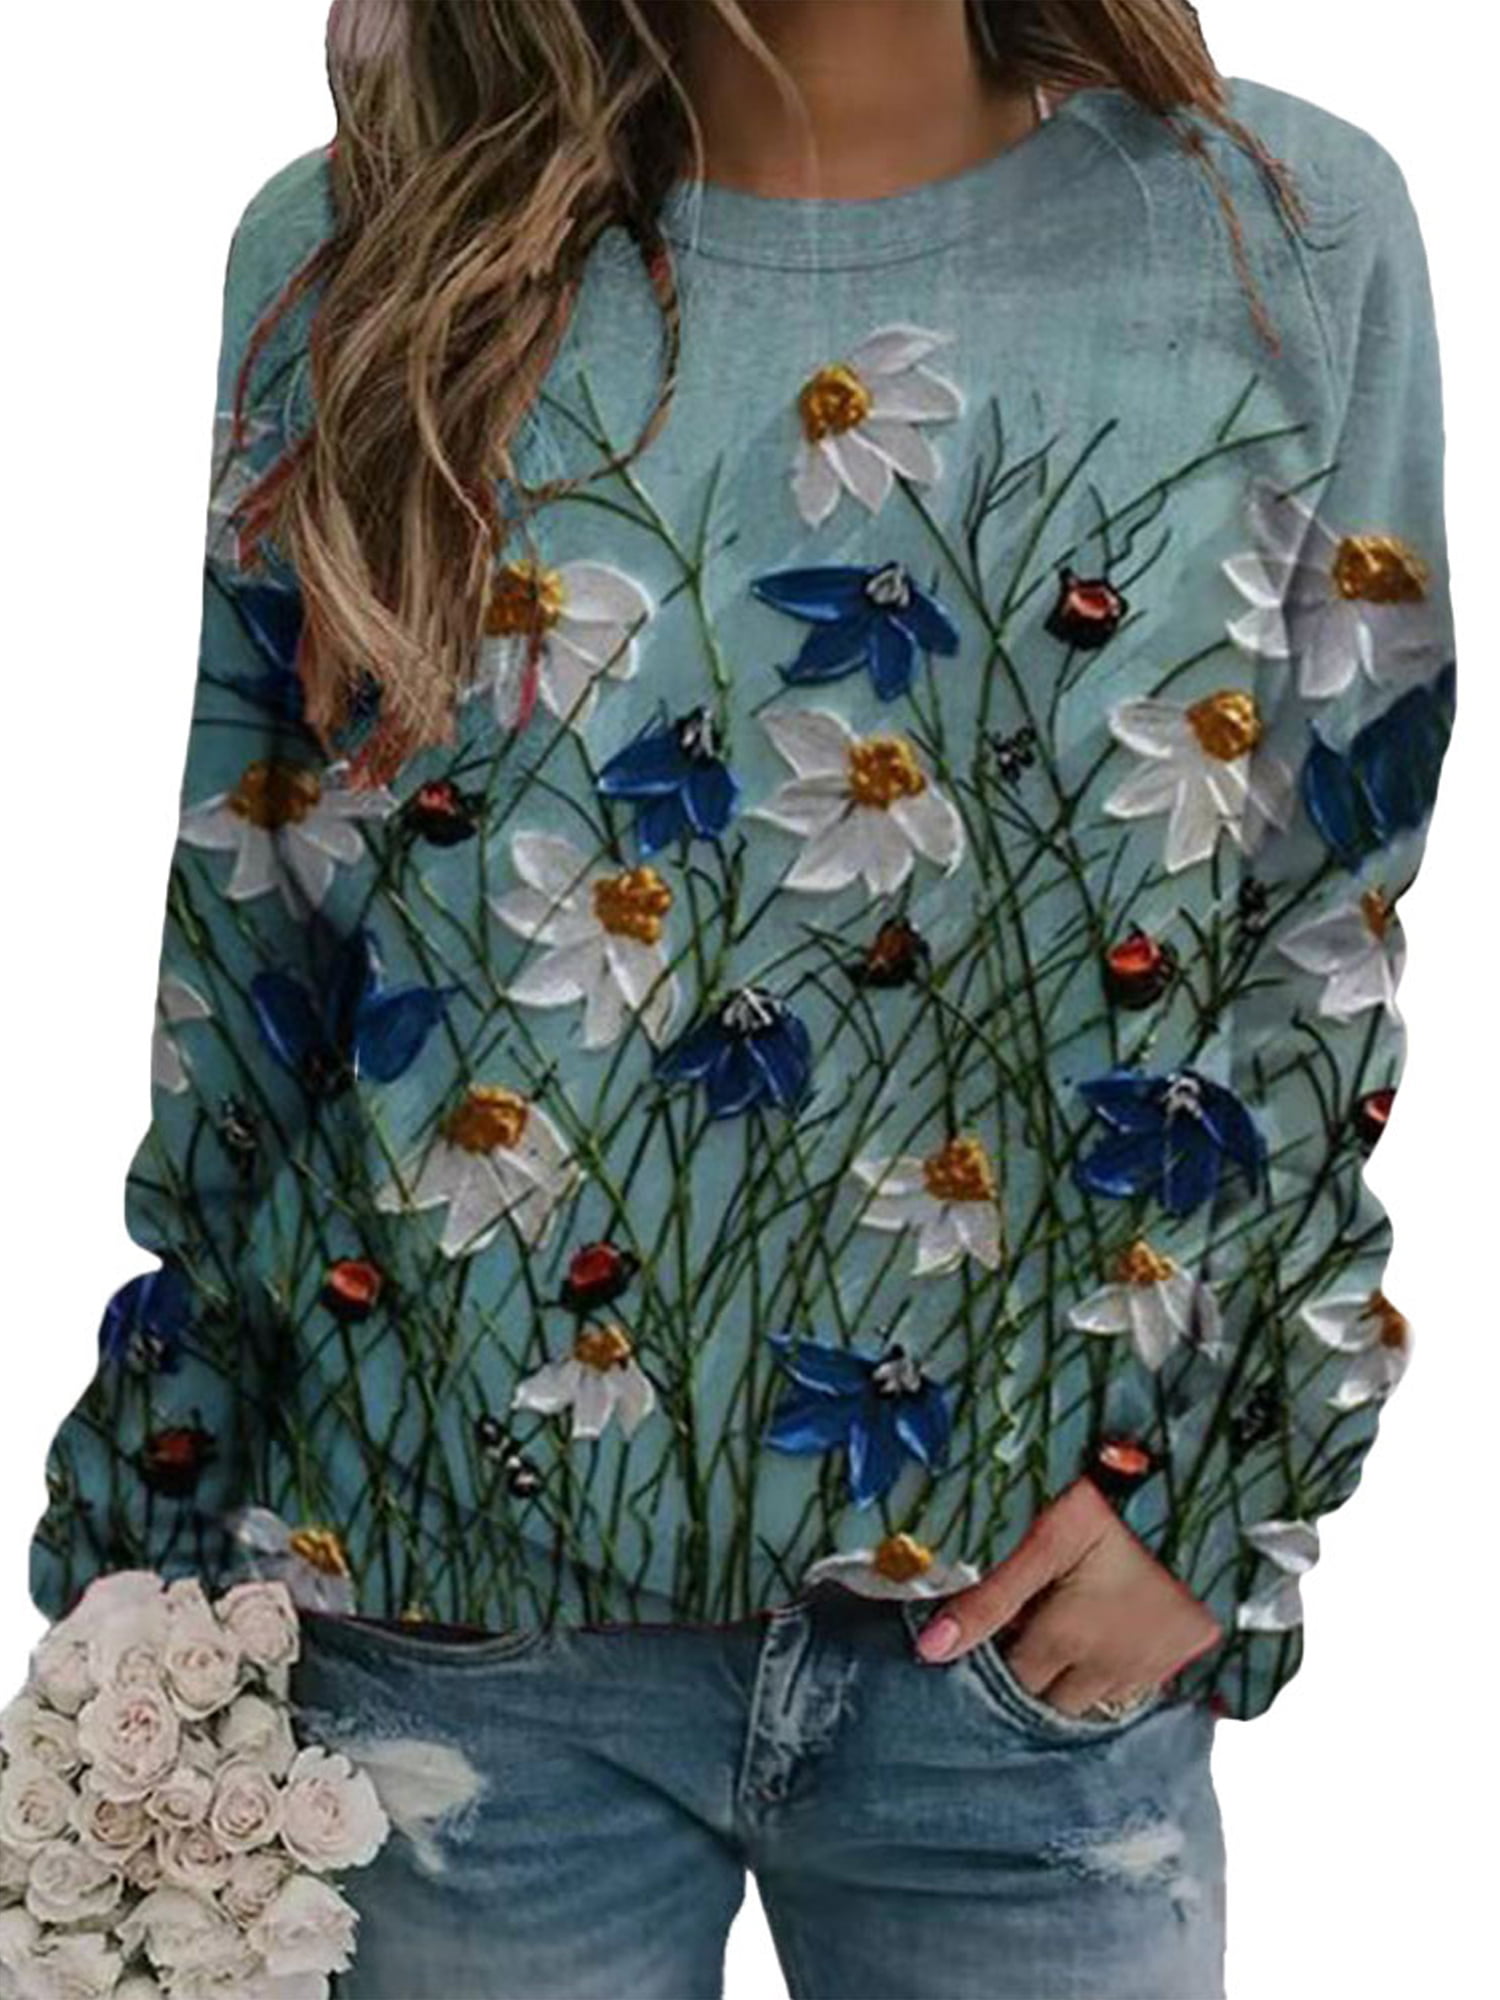 Vintage flowers blouse button up sheer sleeves spring bouquet shirt size women\u2019s M L size 10